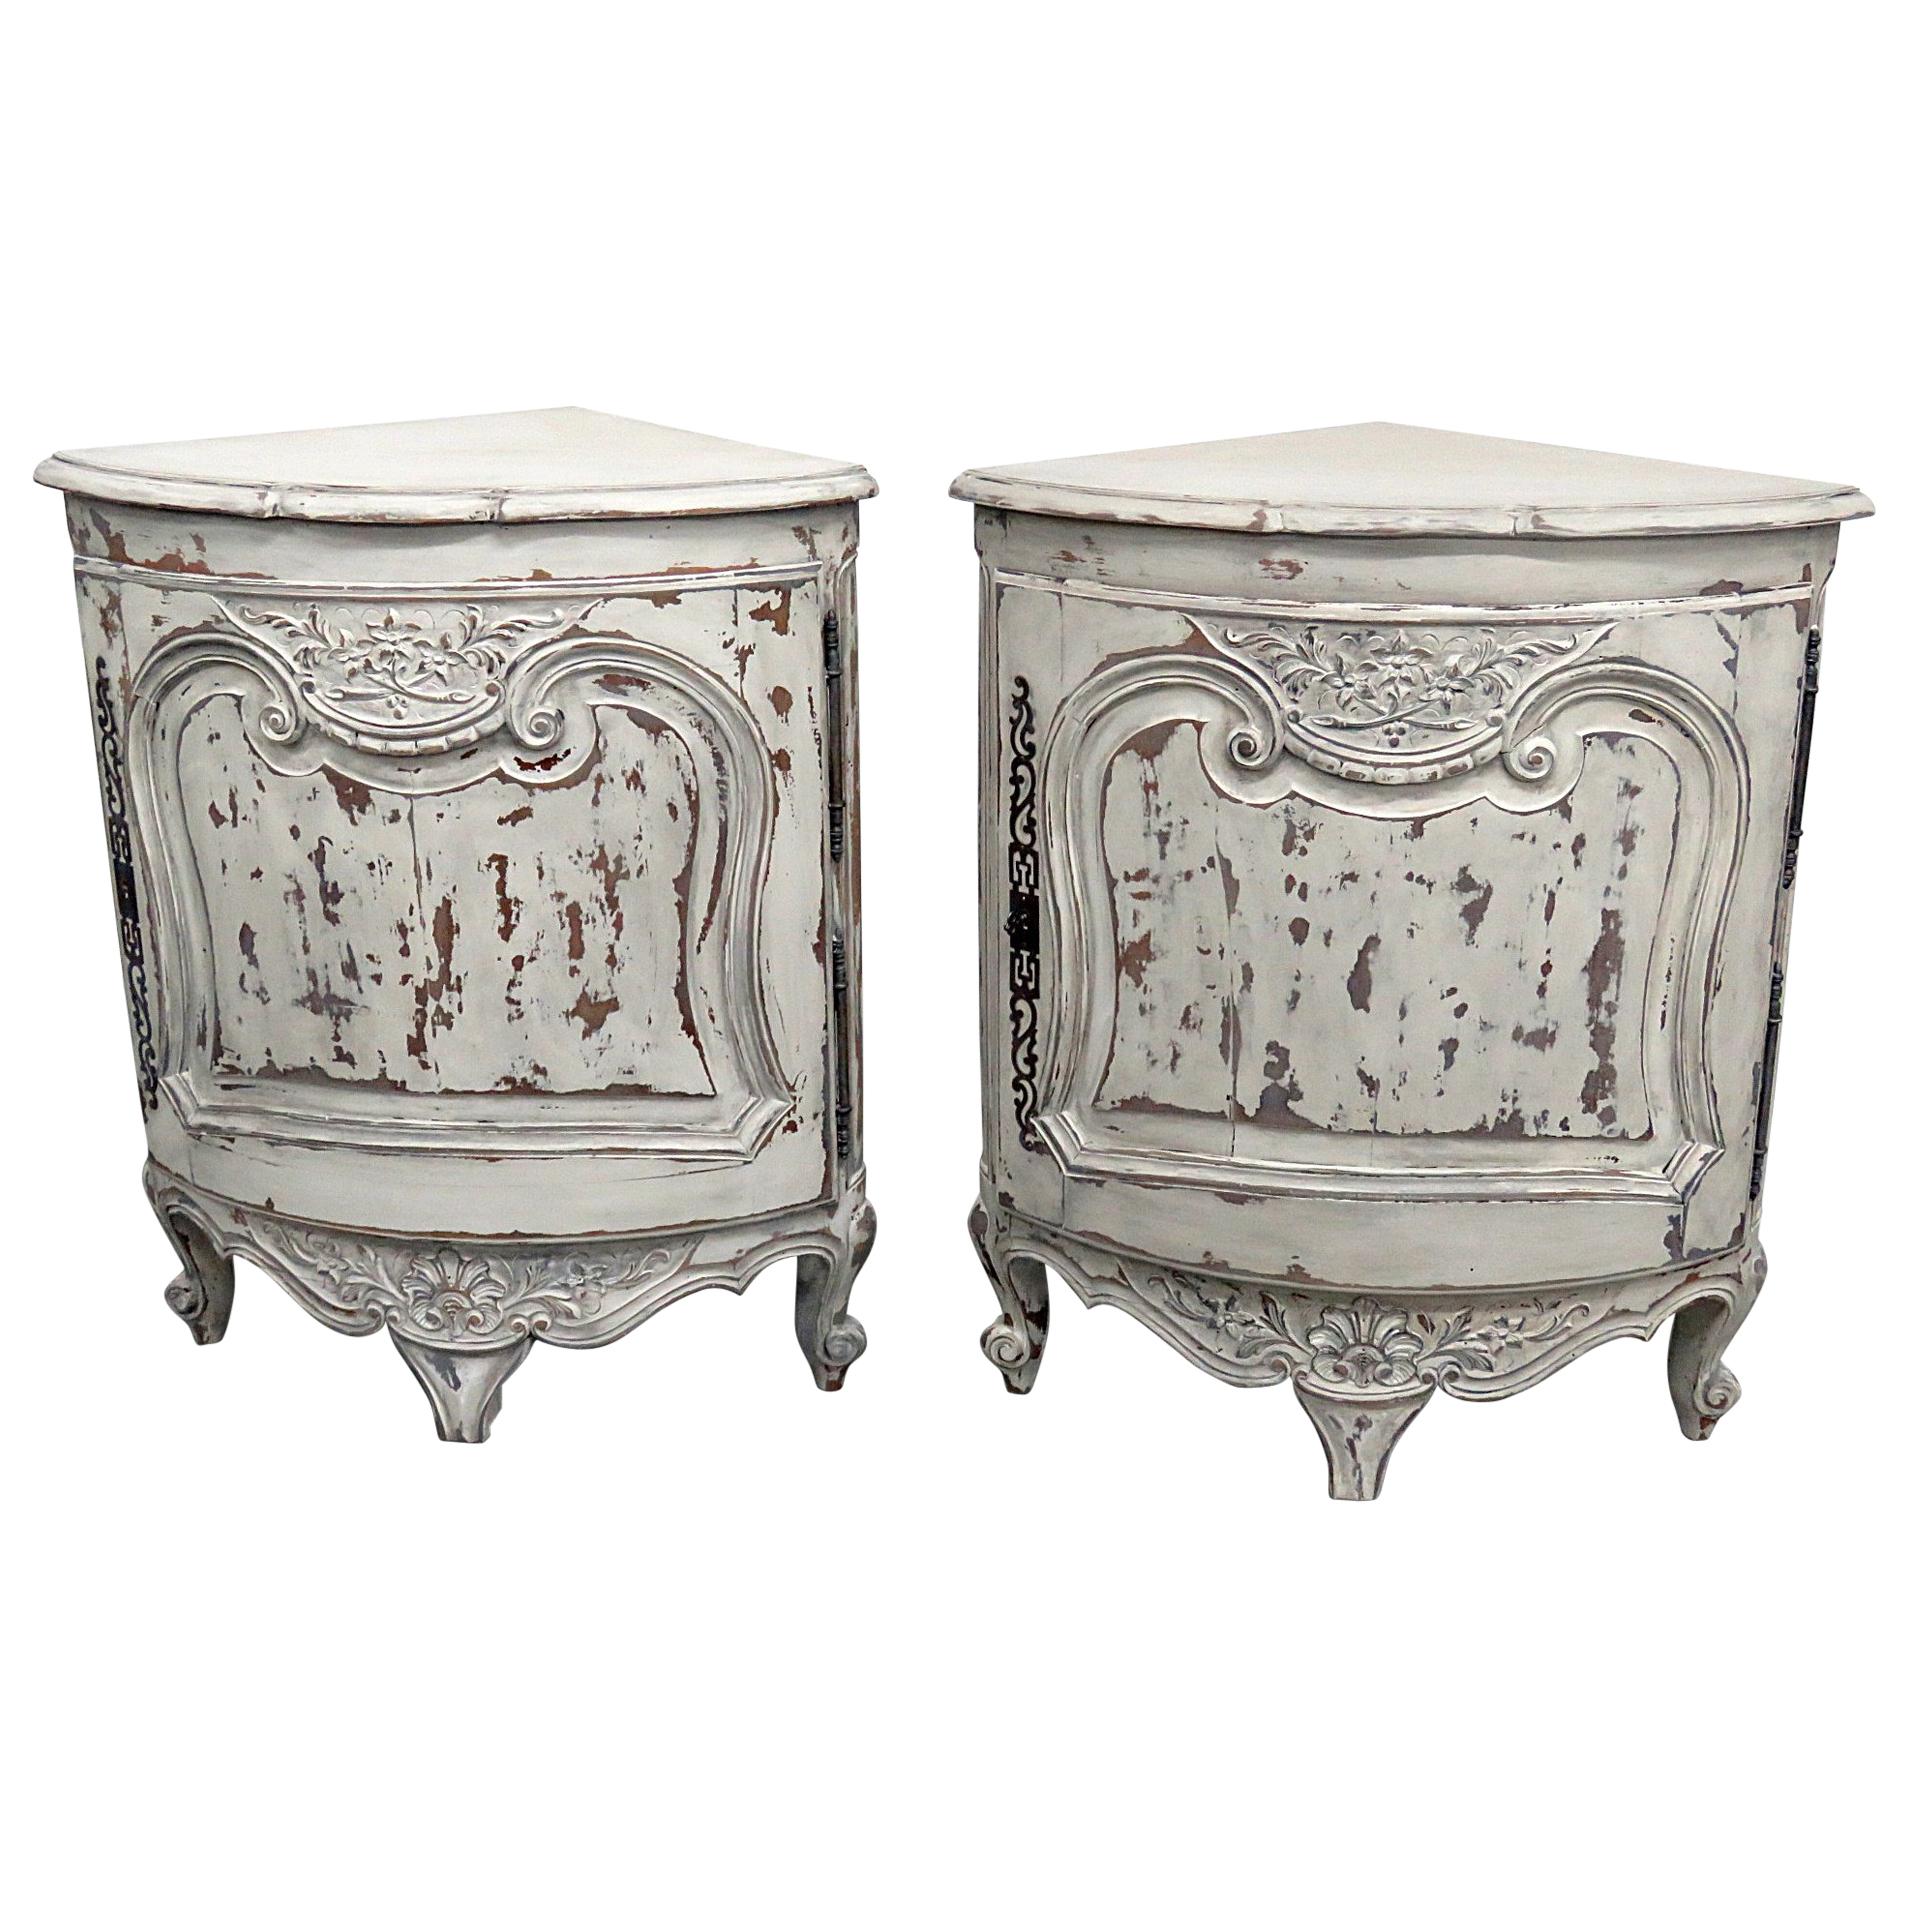 Pair of Country French Paint Decorated Corner Cabinets